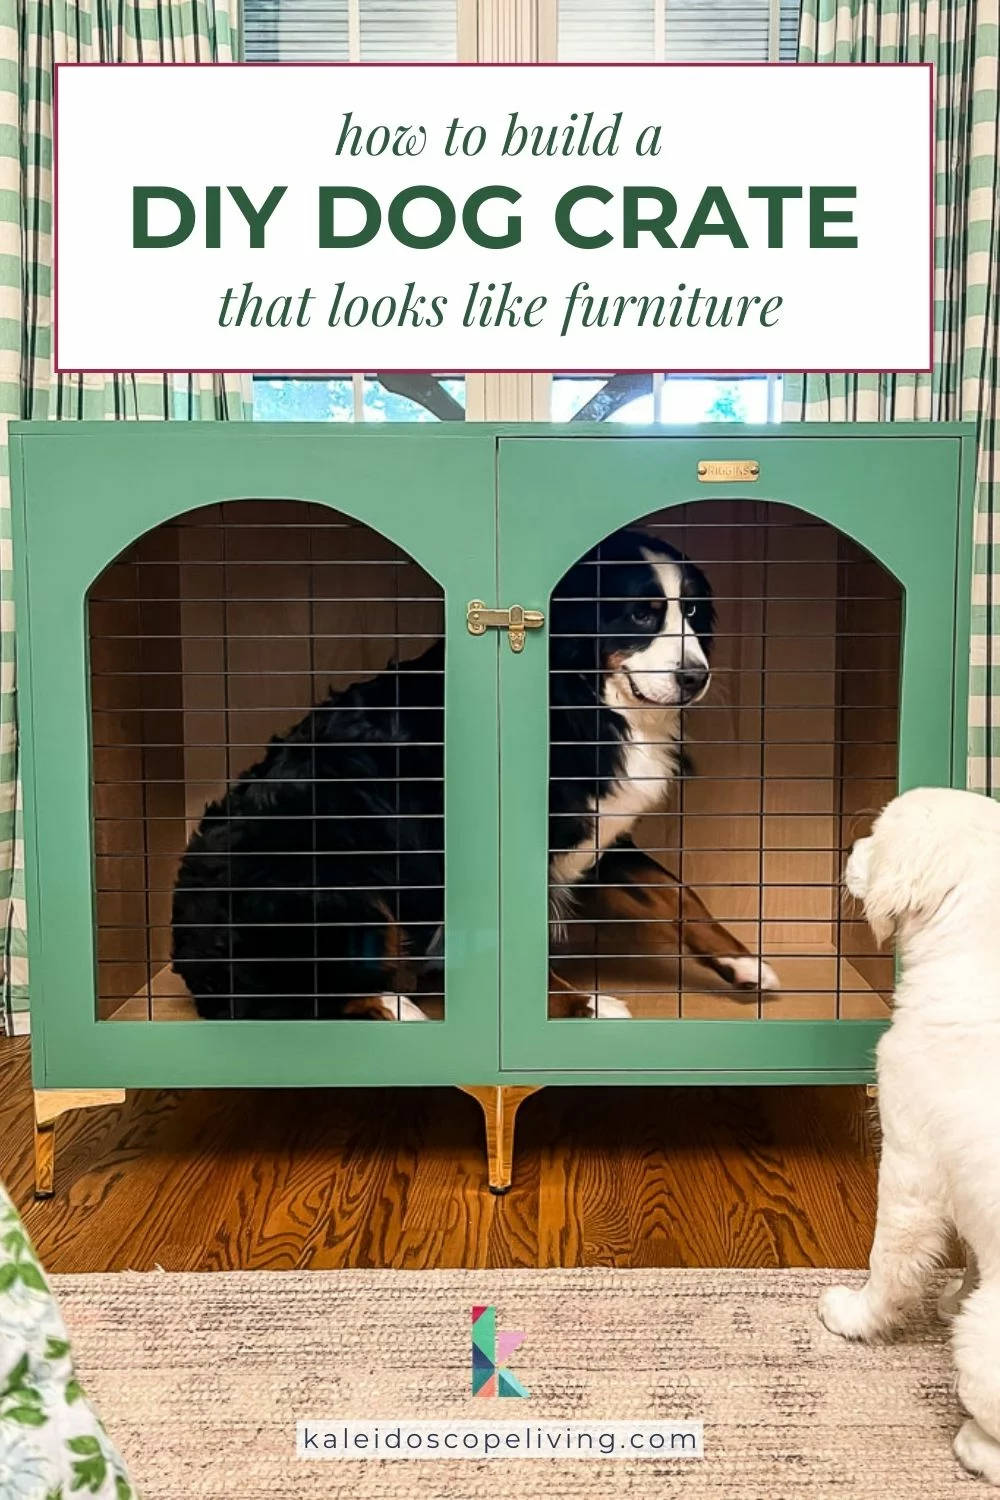 Bernese Mountain Dog inside a DIY wood dog crate painted green with brass accents